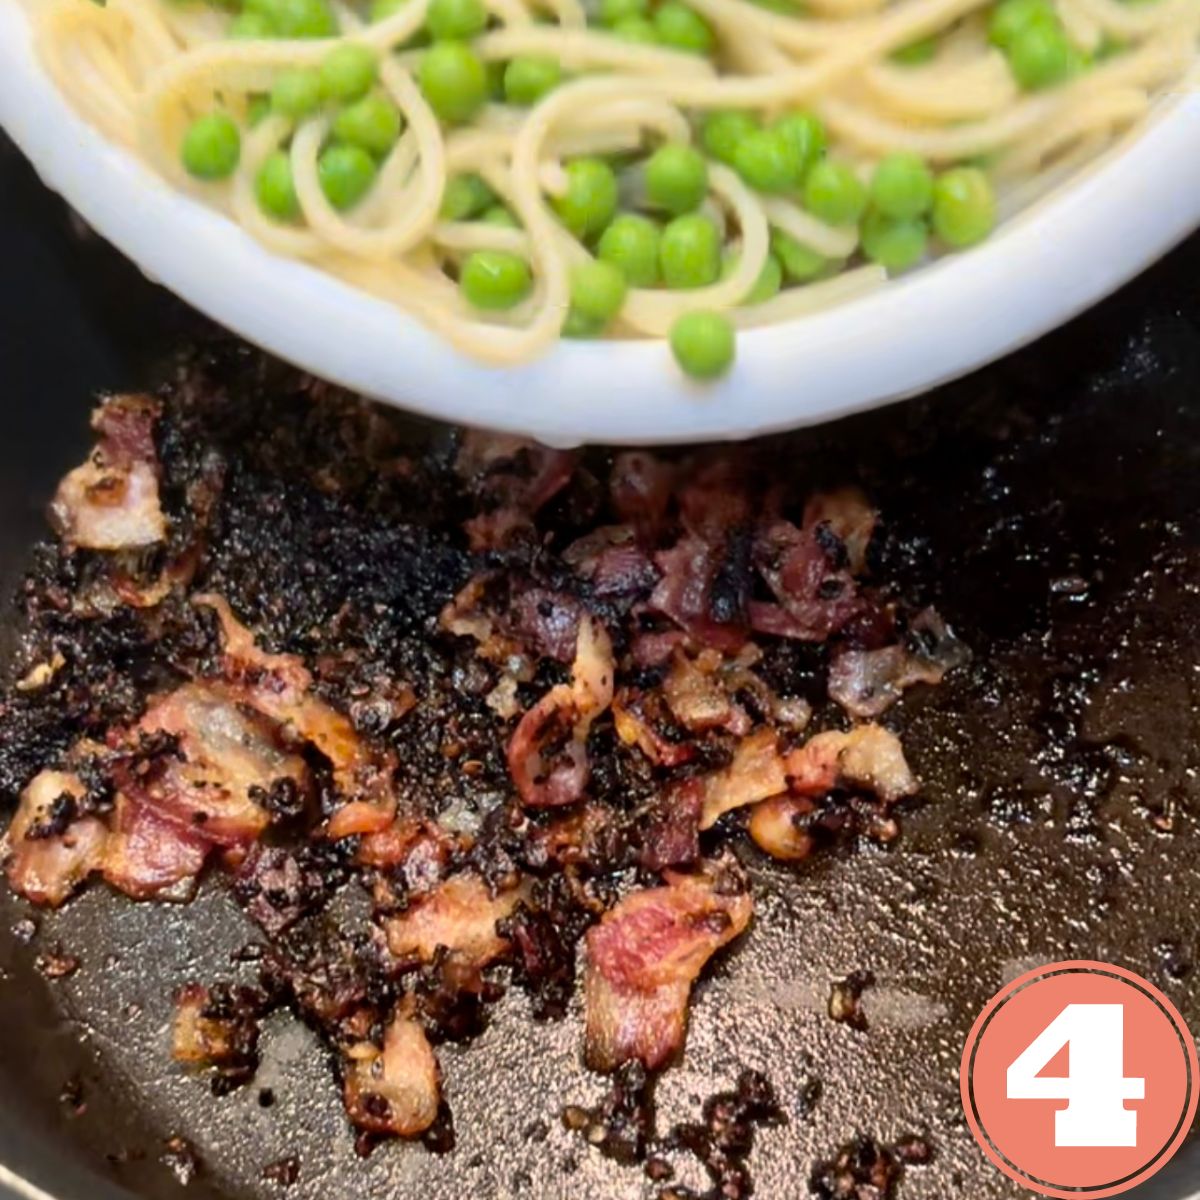 Pasta and peas being poured into a skillet with crispy bacon